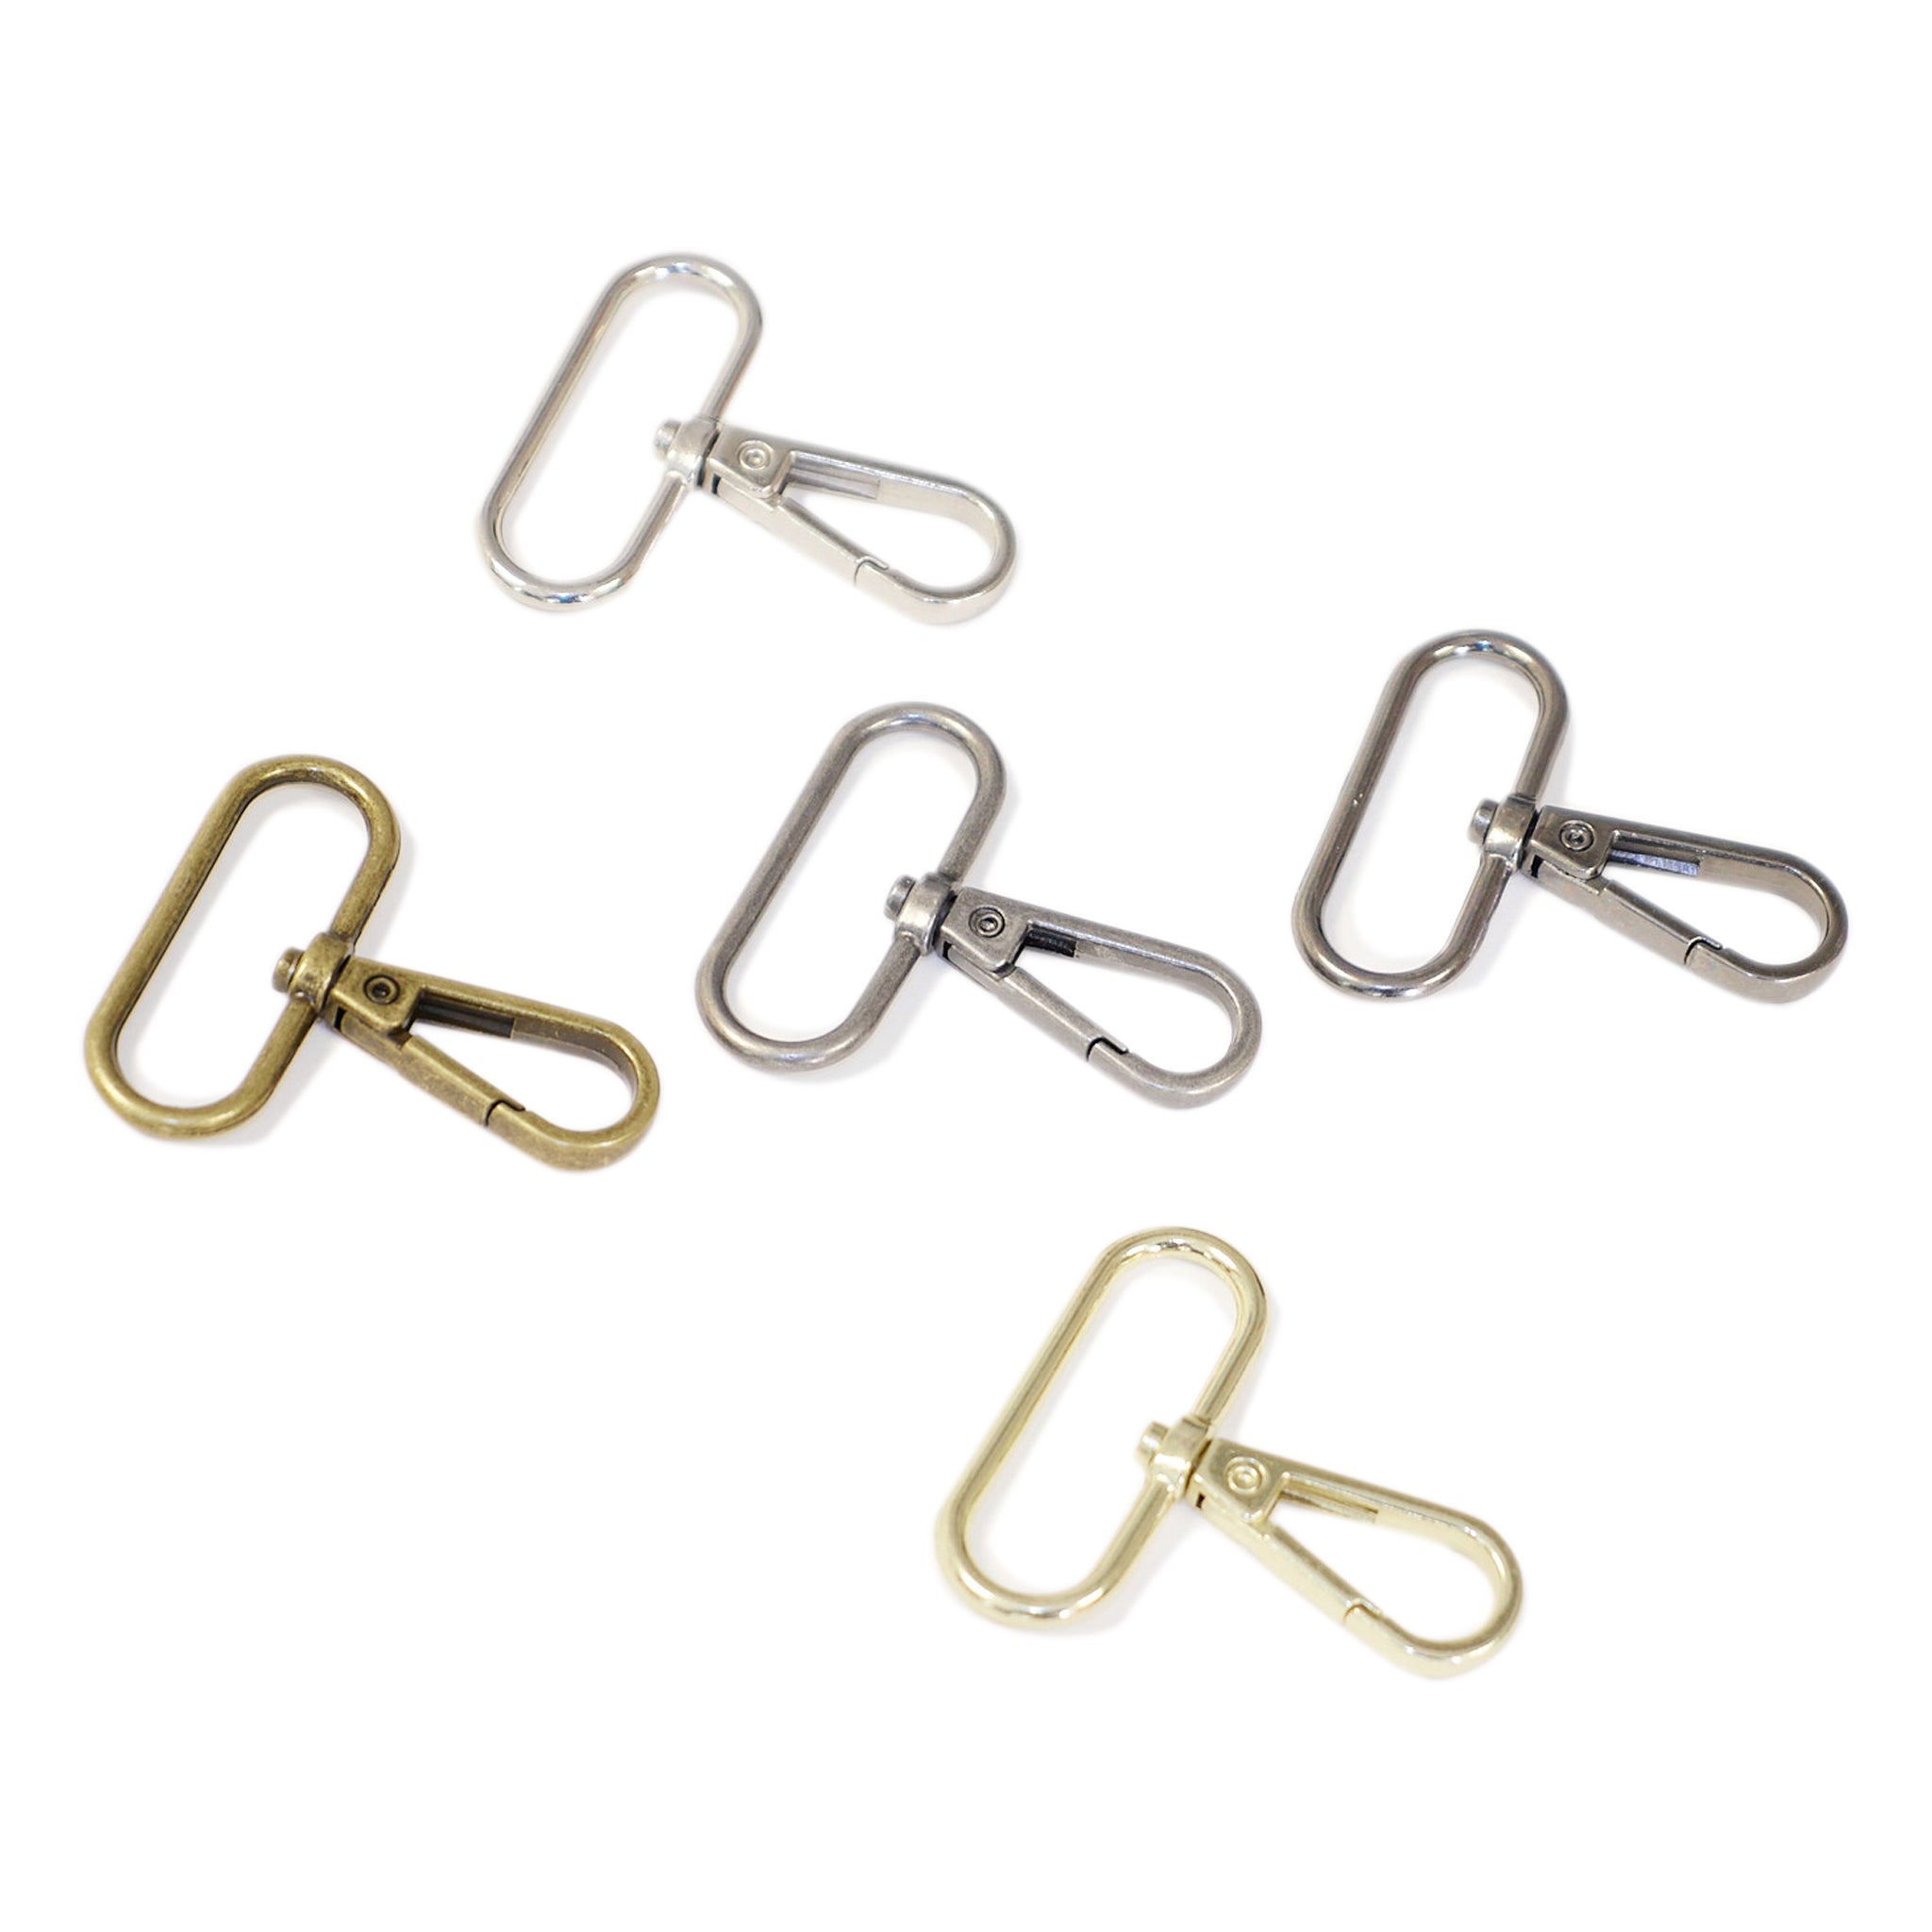 Snap Hook Swivel Clips 38mm - Pack of 2